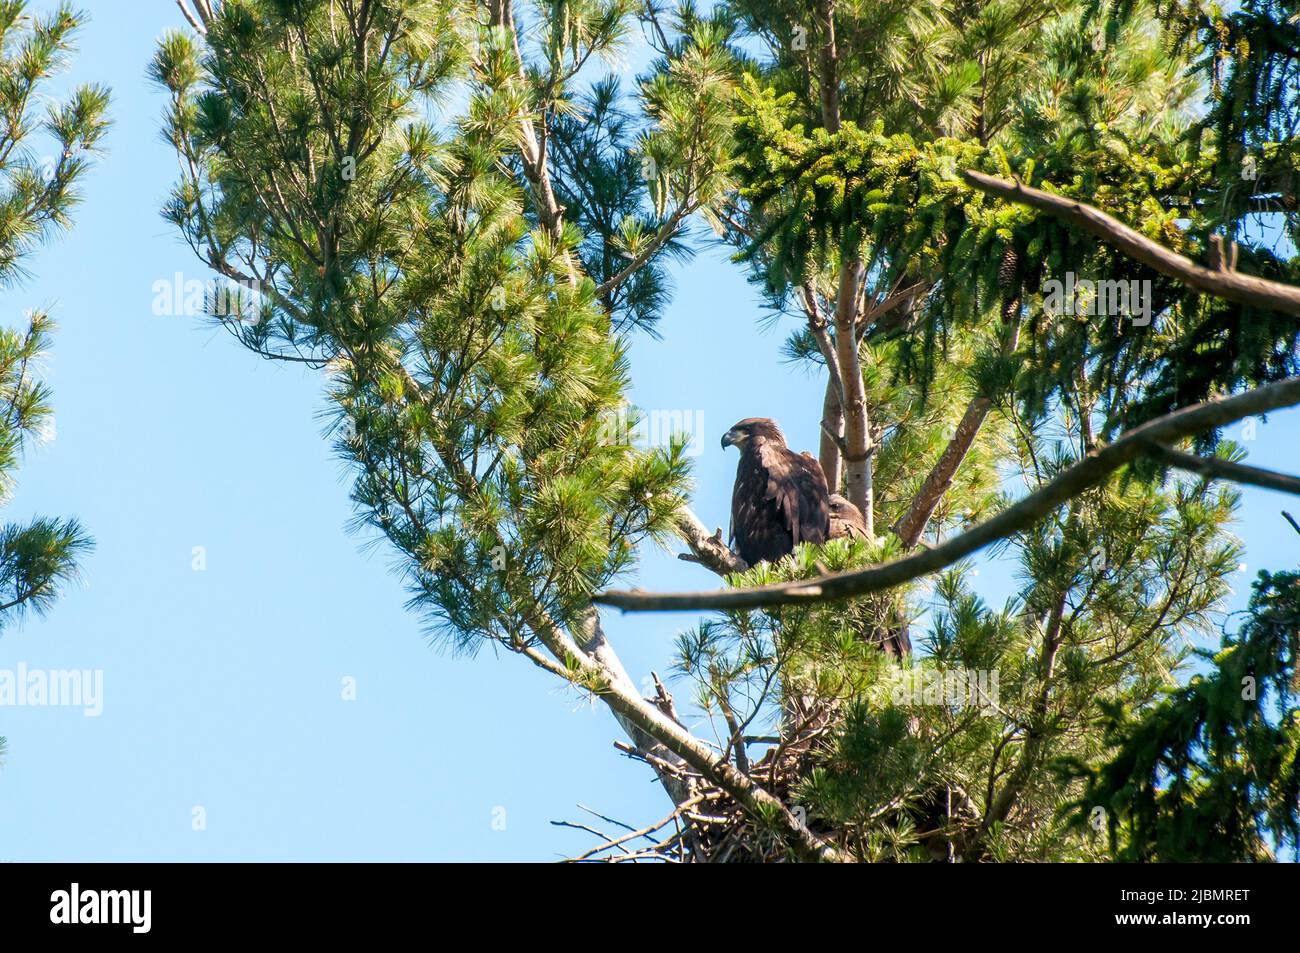 Vadnais Heights, Minnesota. John H. Allison forest. A pair of young bald eagle nestlings, Haliaeetus leucocephalus, sitting in their nest. Stock Photo